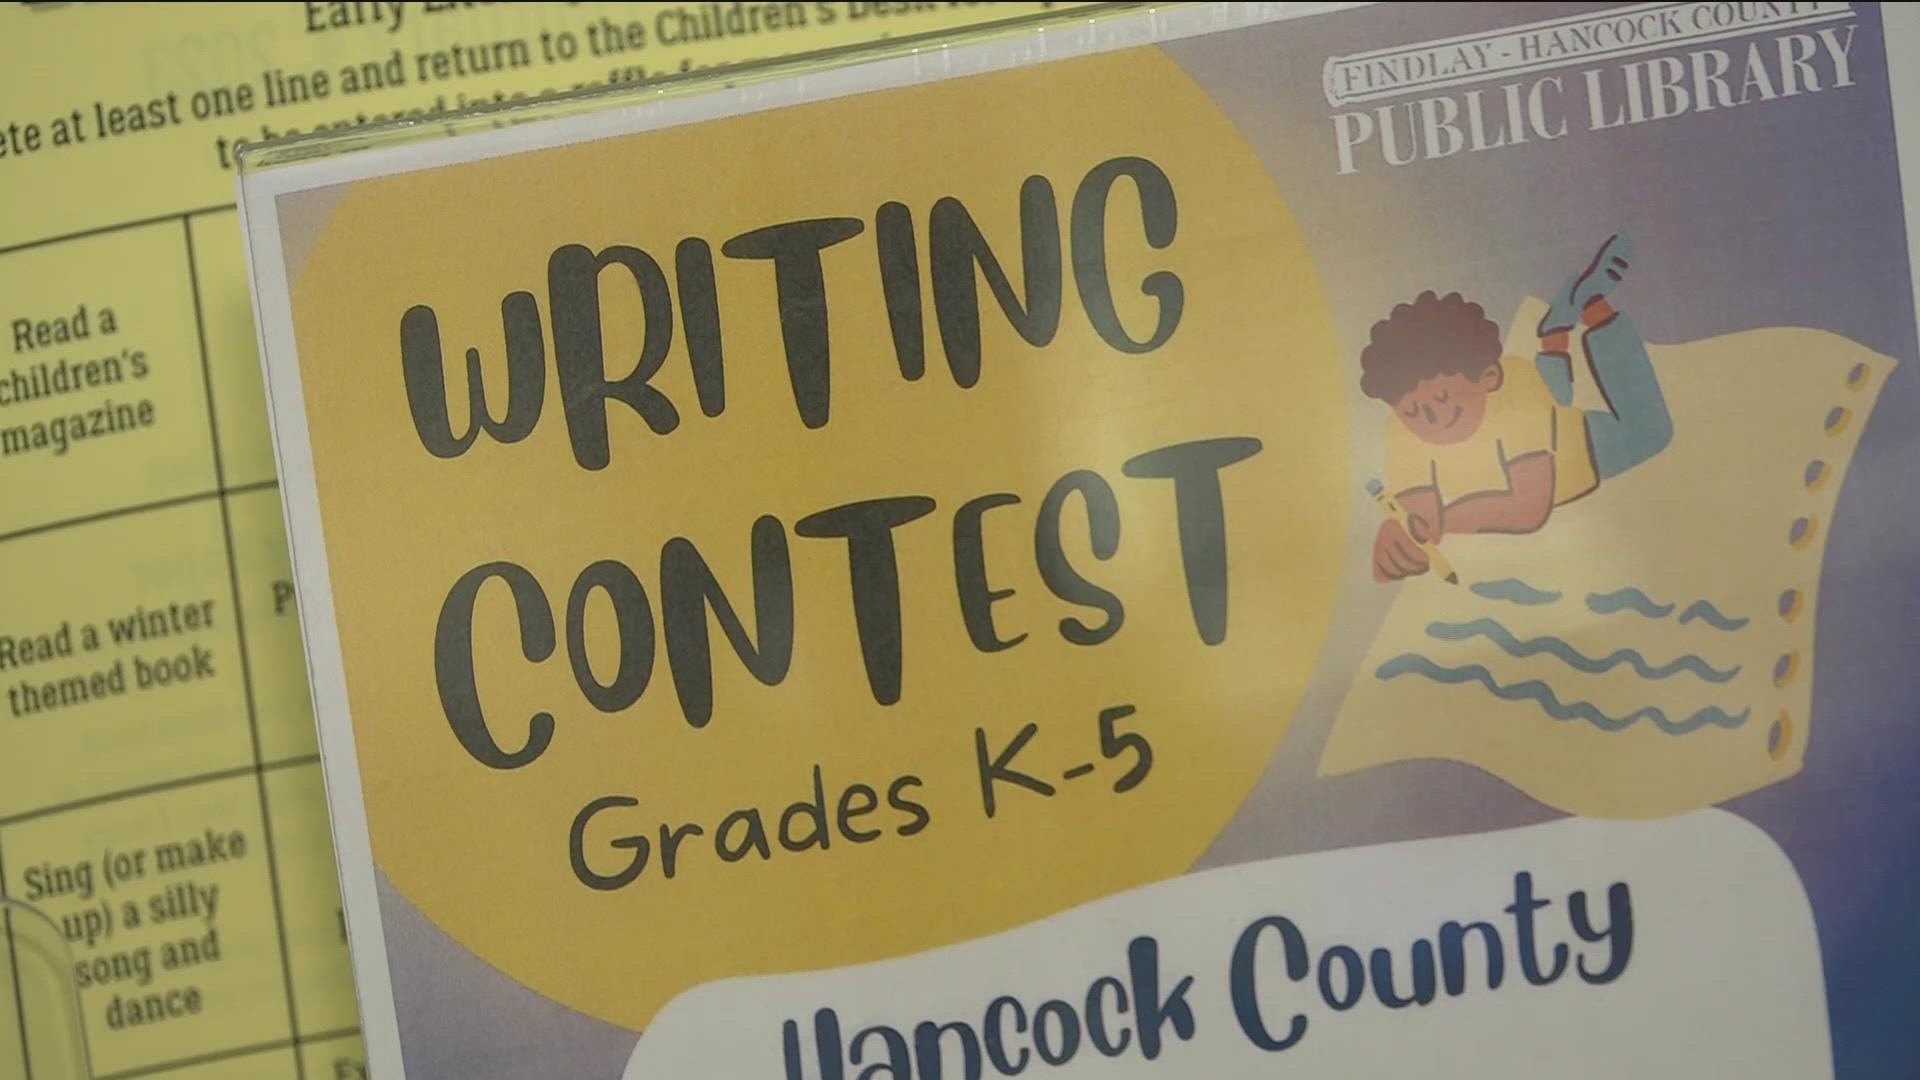 The Tell-a-Tale Contest offers Hancock County students the chance to see their stories in print.